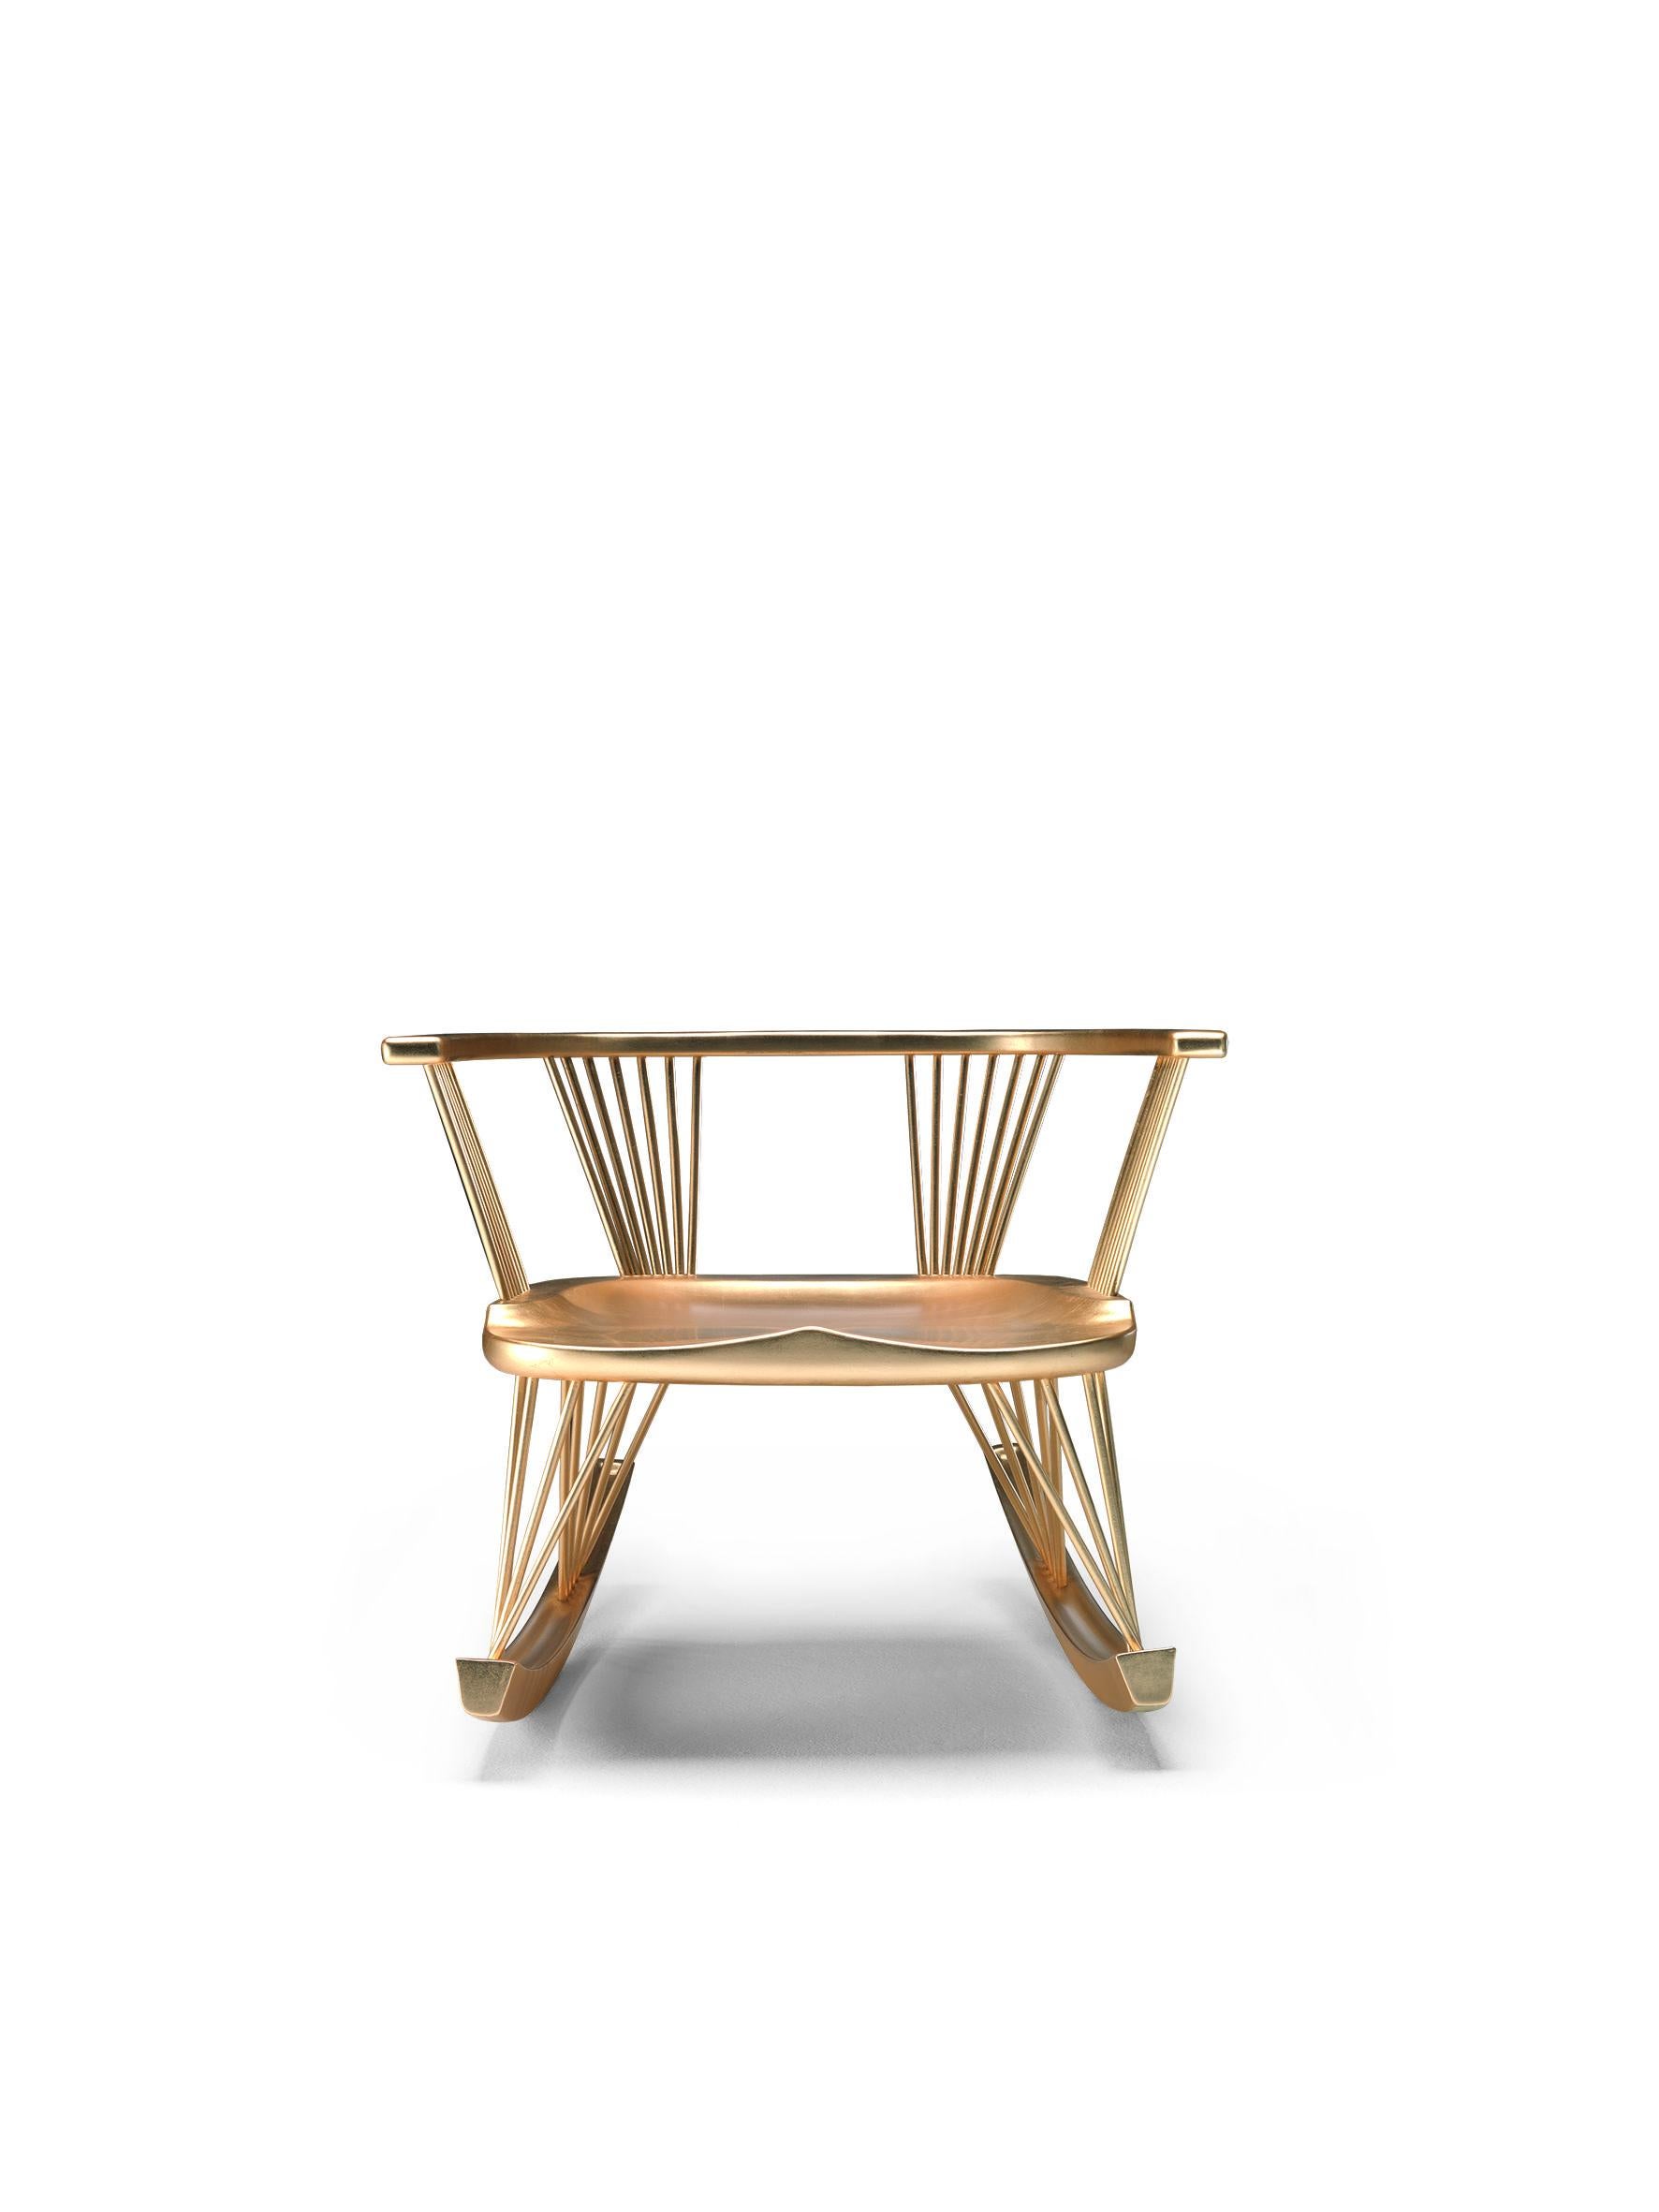 SITLALI Low Rocking Chair in Solid Wood and Thin Overlapping Road and Gold Leaf In New Condition For Sale In Lentate sul Seveso, Monza e Brianza